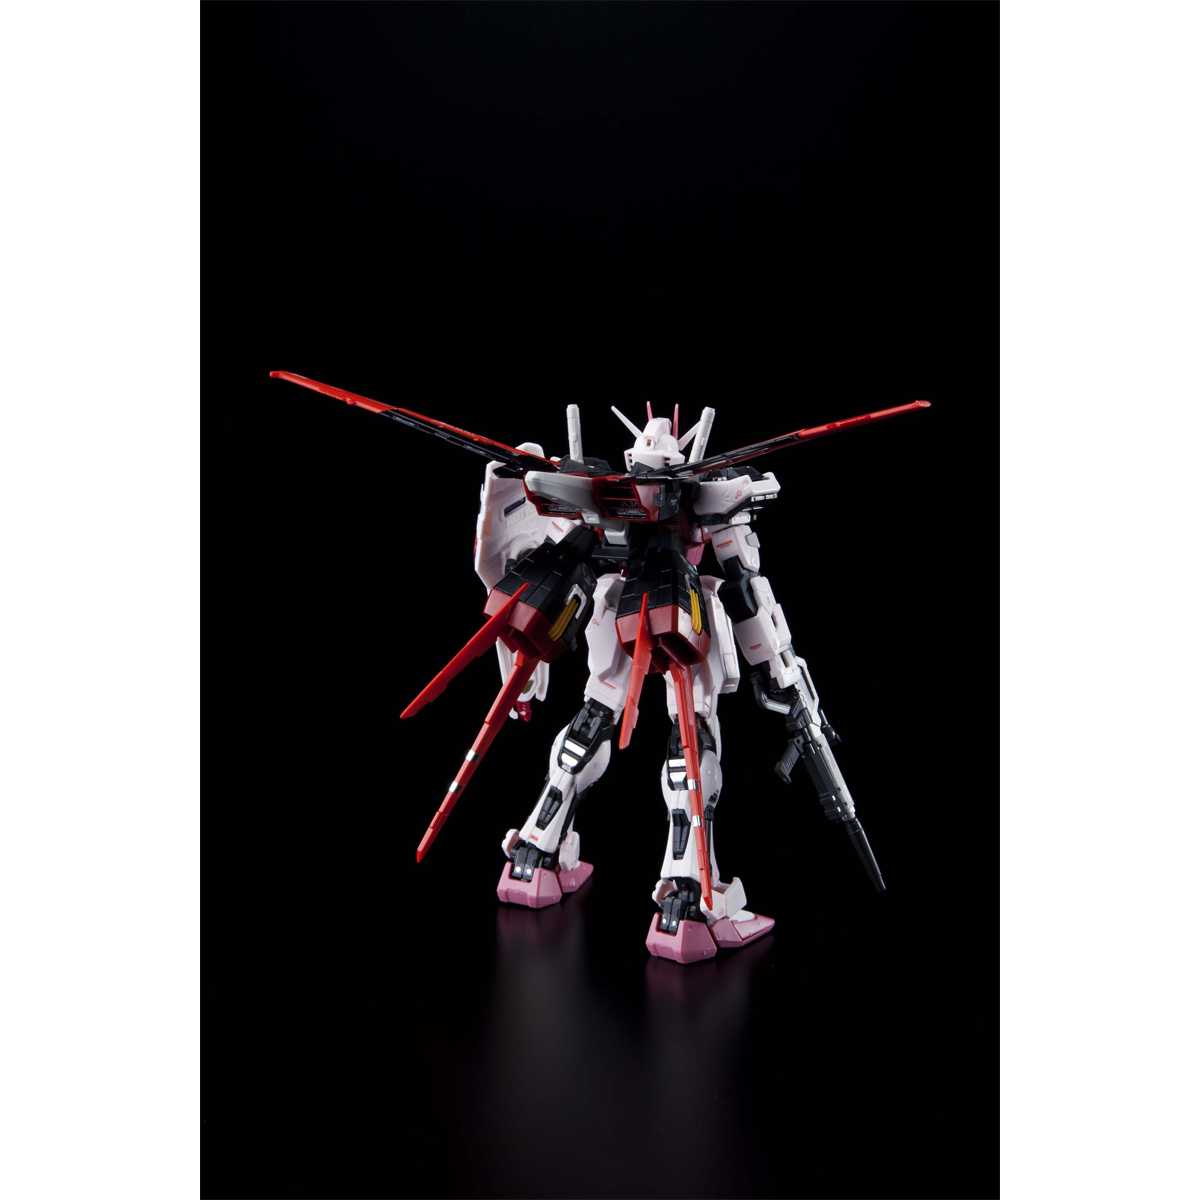 Bandai Hobby HGCE Strike Rouge Model Kit 1/144 Scale 4543112891624 Ban189162 for sale online 